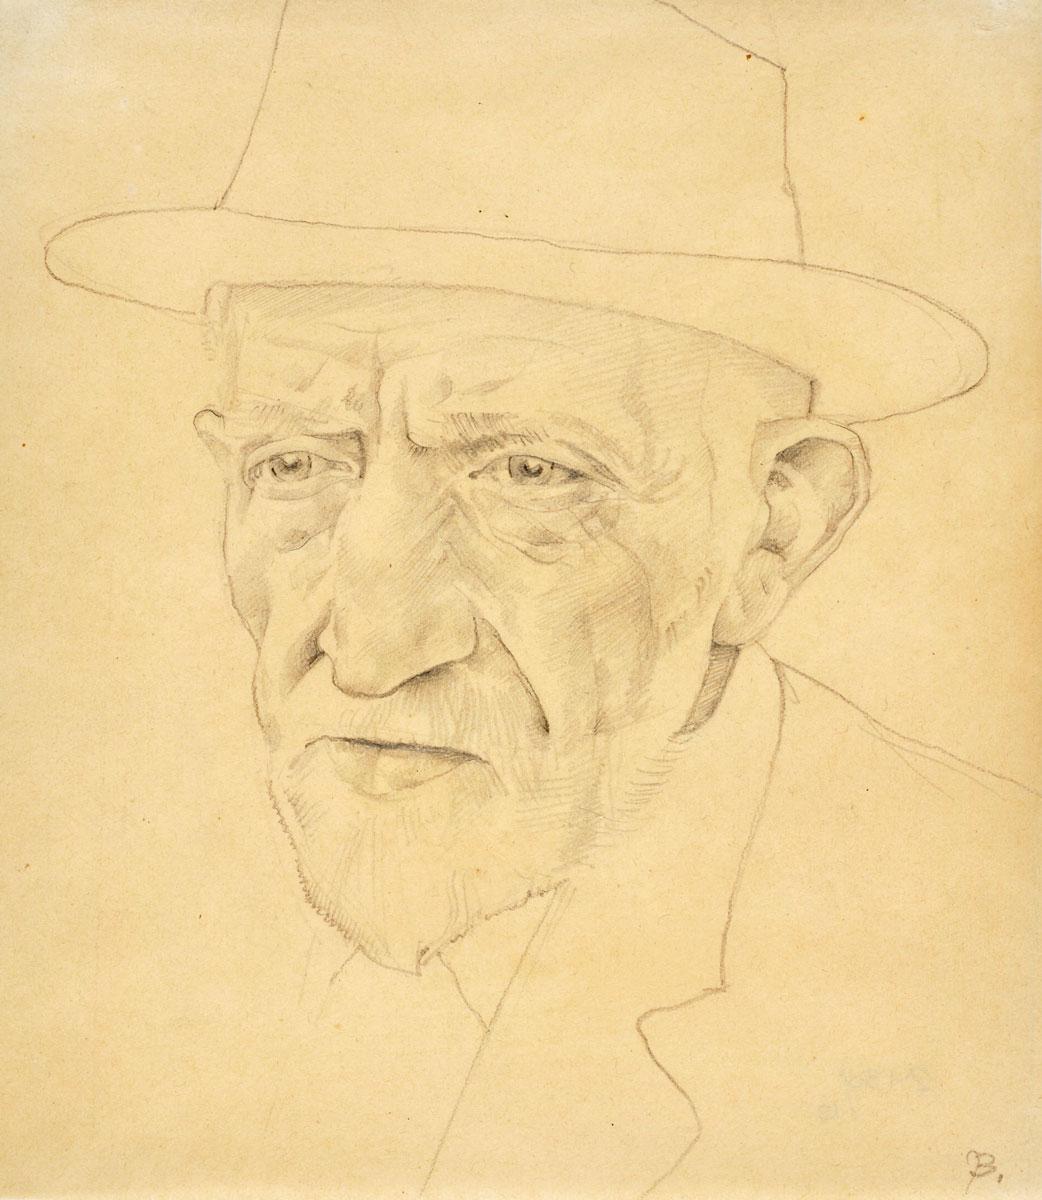 Jacob Barosin (1906-2001), Portrait of an Elderly Man with Hat, Gurs Camp, 1943